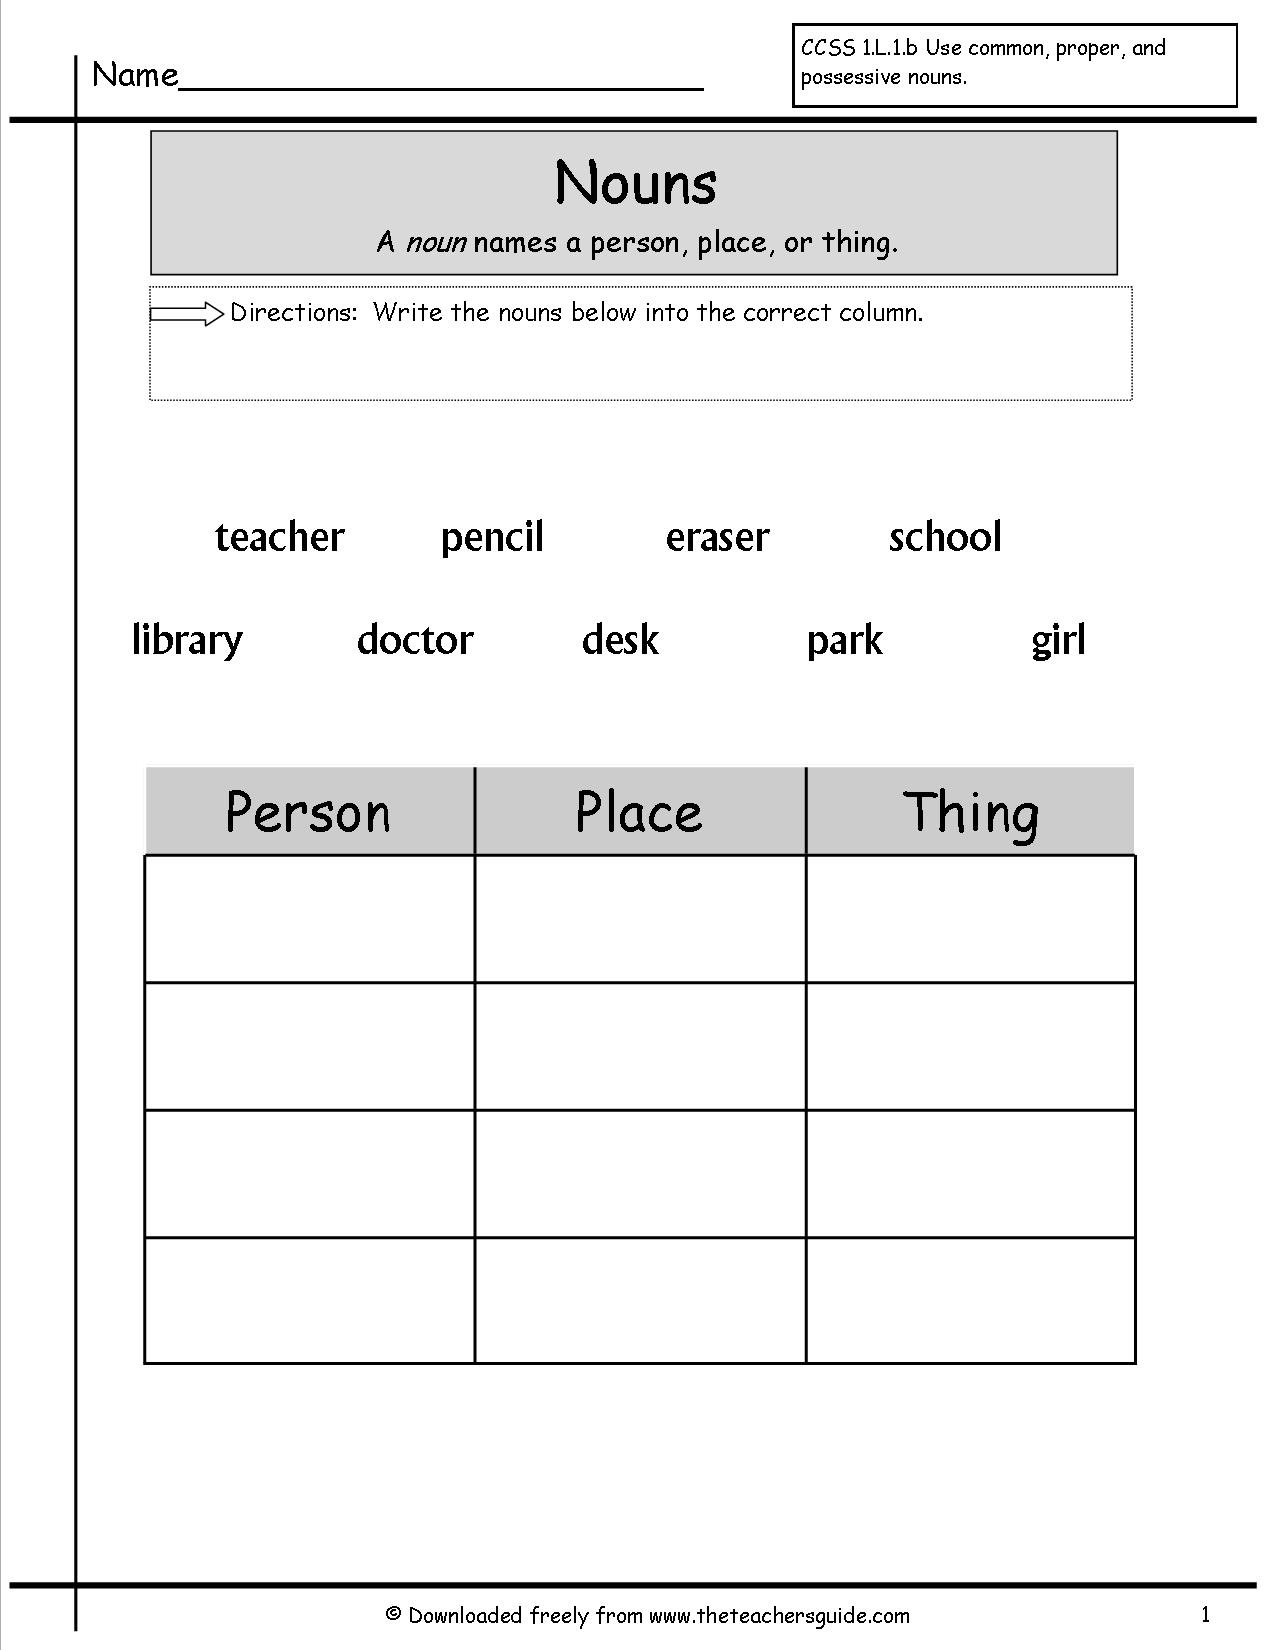 Noun Worksheet For Class 2 With Answers Pdf